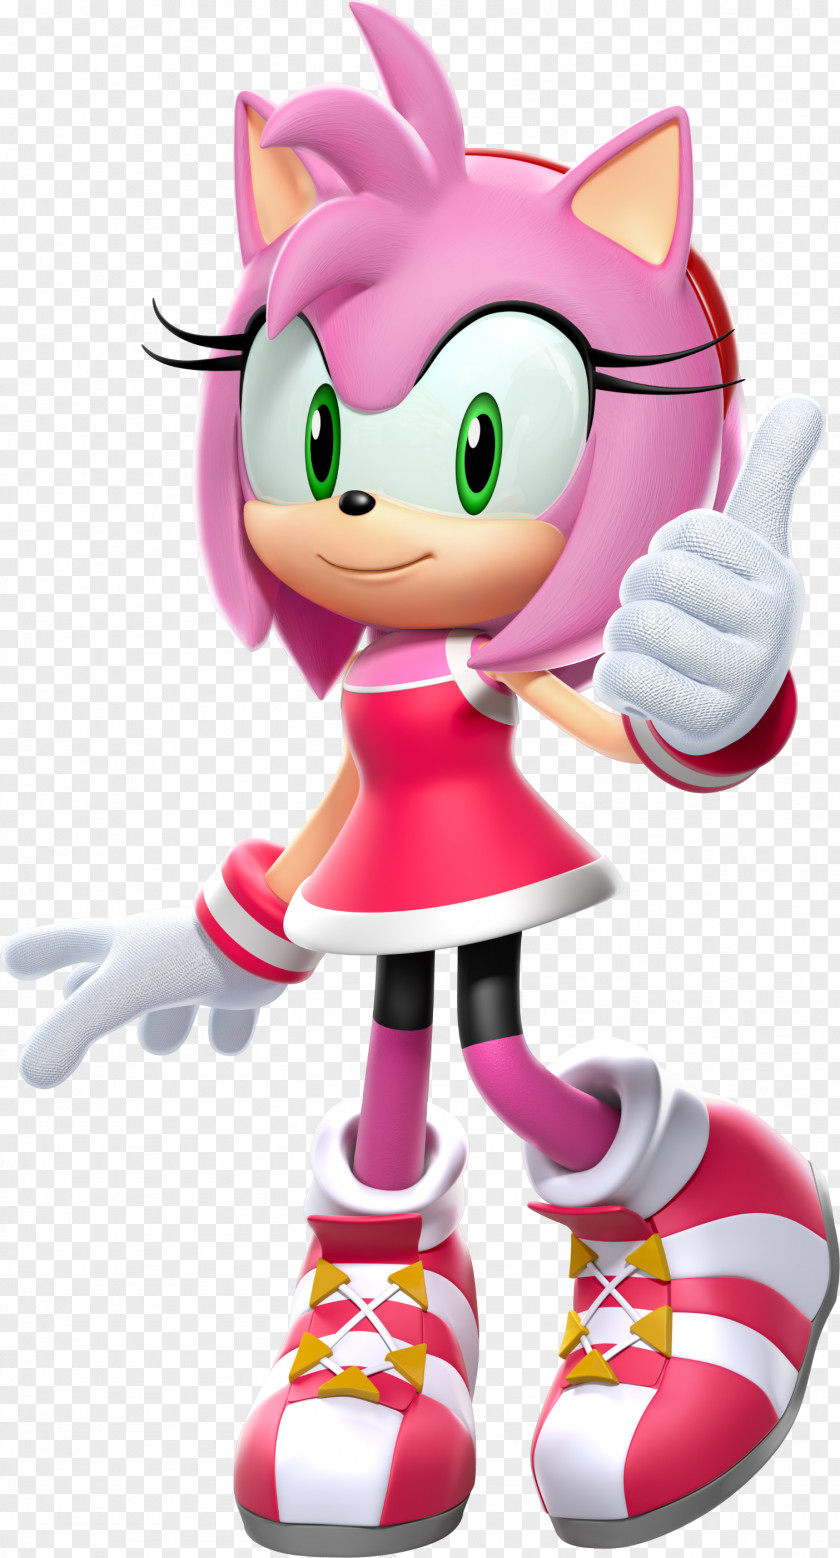 Rio Mario & Sonic At The 2016 Olympic Games Hedgehog Amy Rose Sega All-Stars Racing PNG